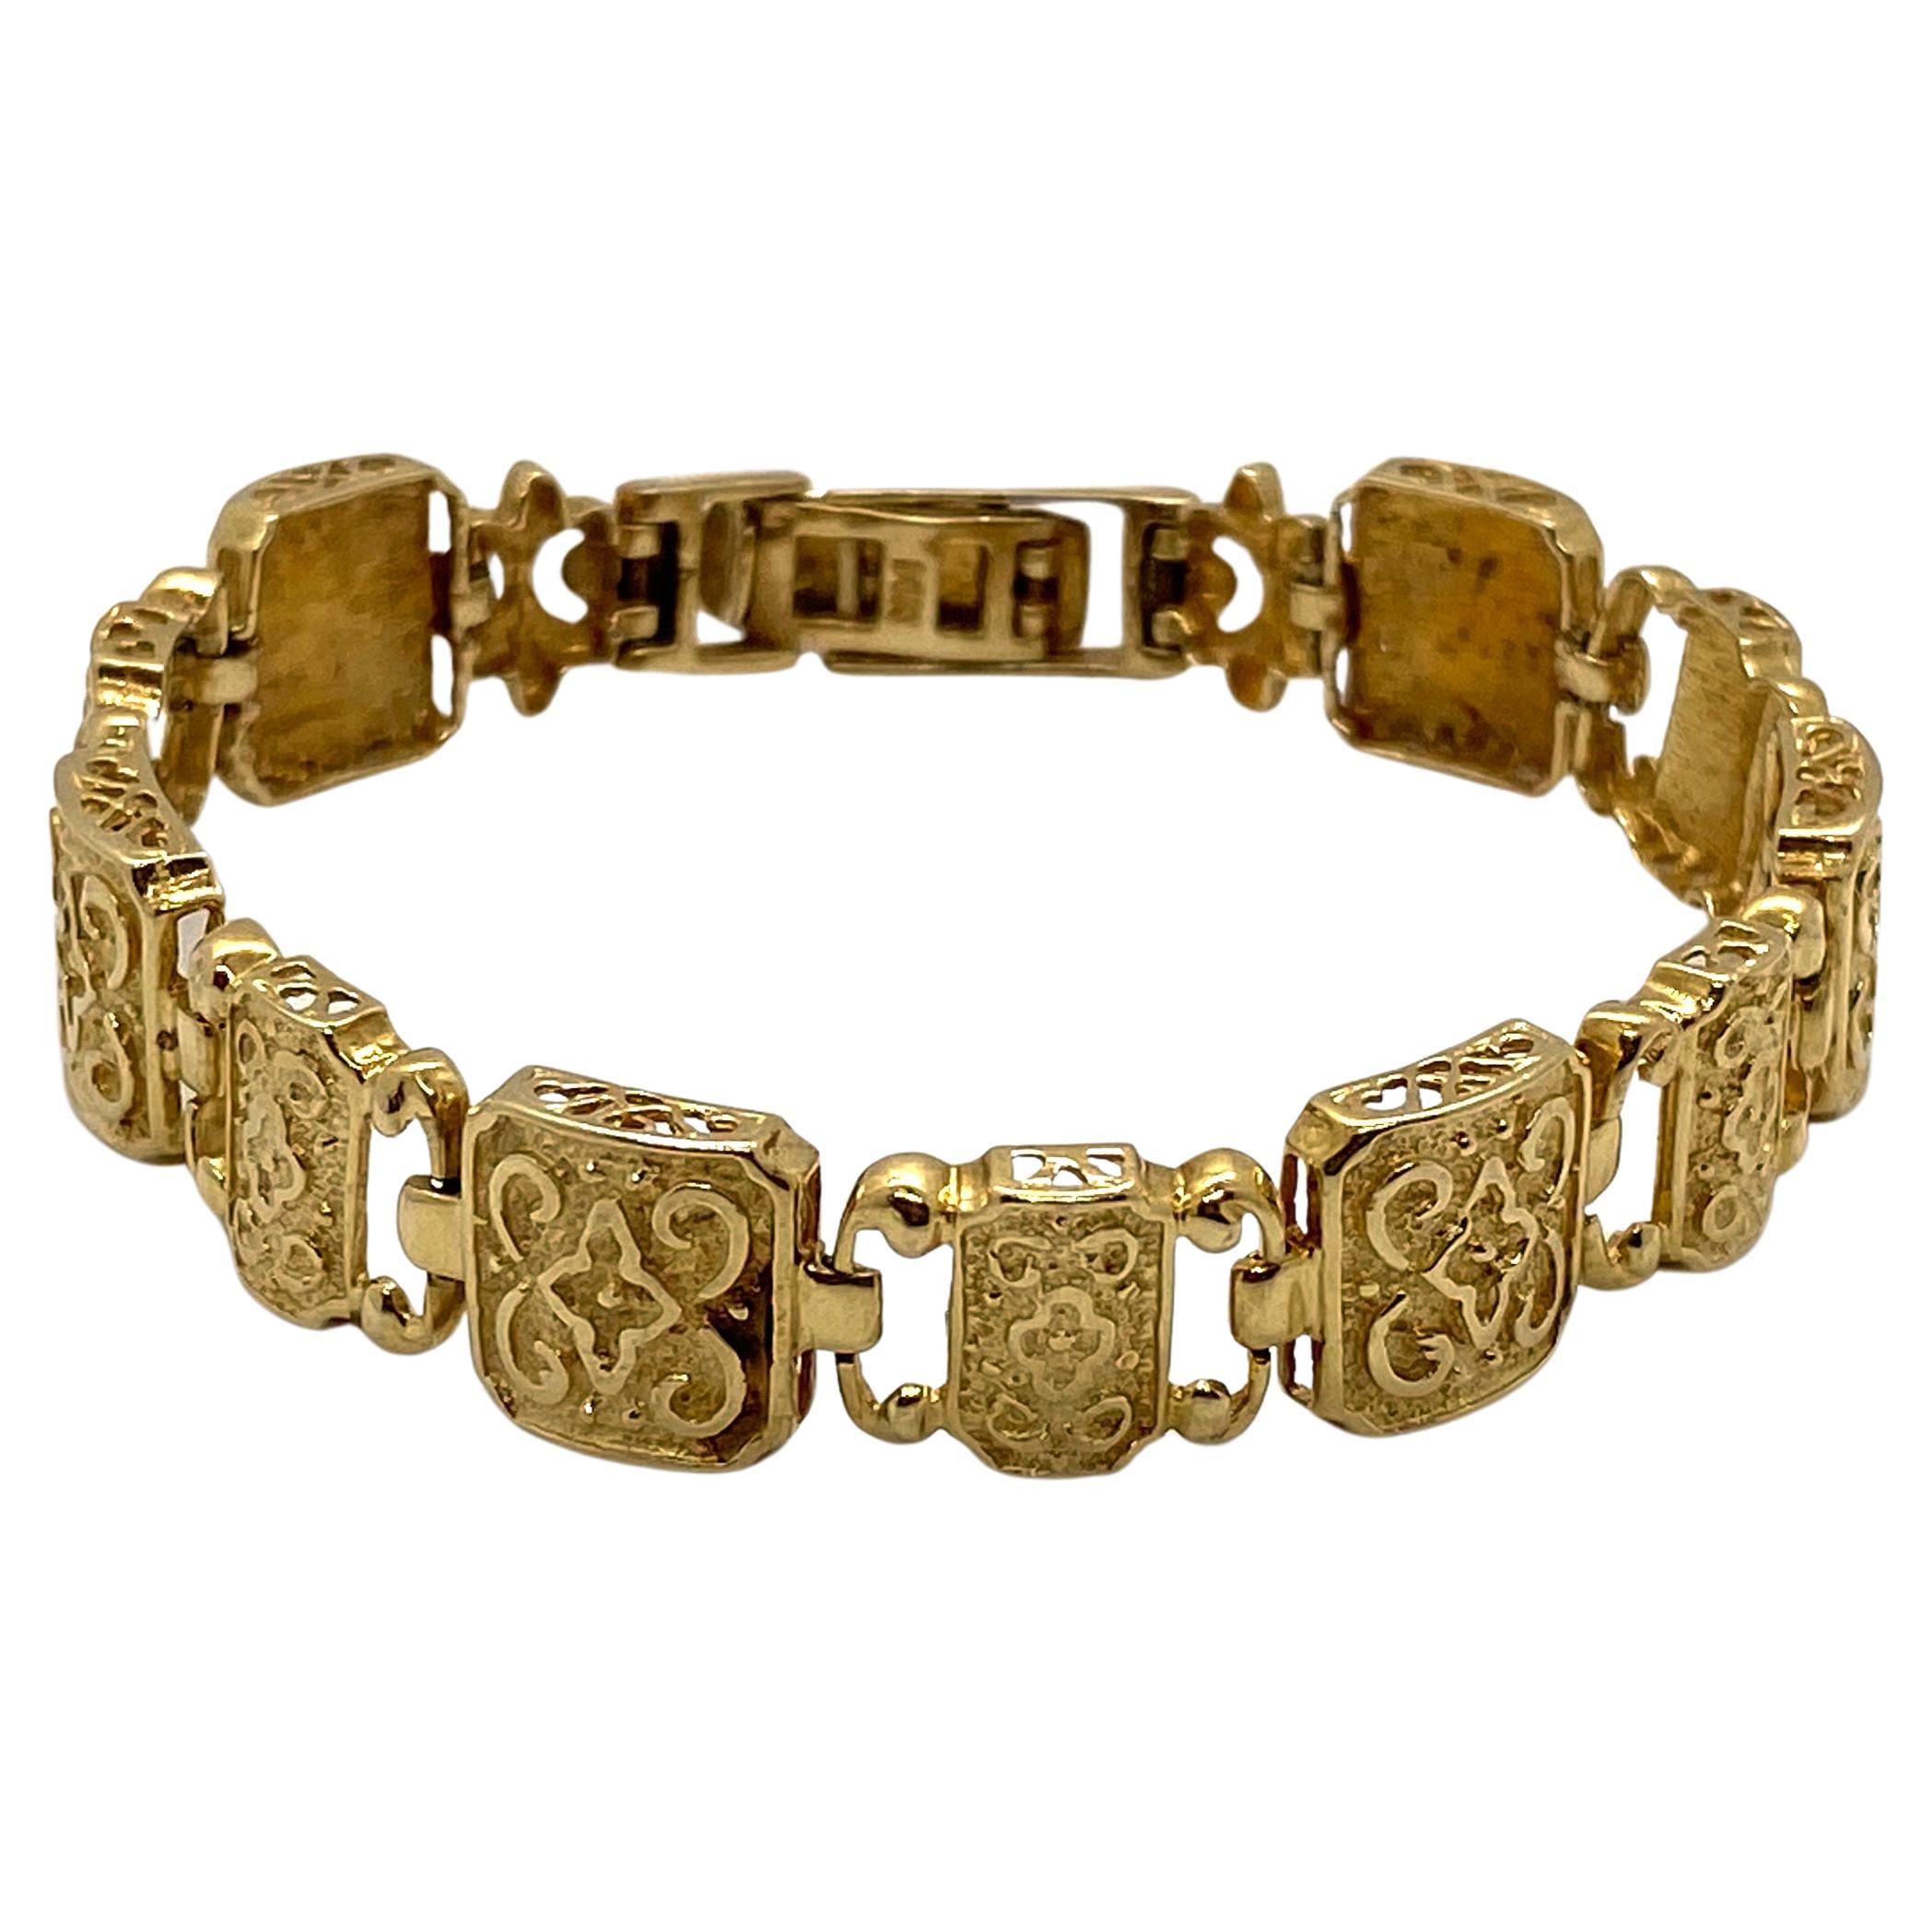 Preowned 14K Yellow Gold Byzantine Style Square Link Bracelet